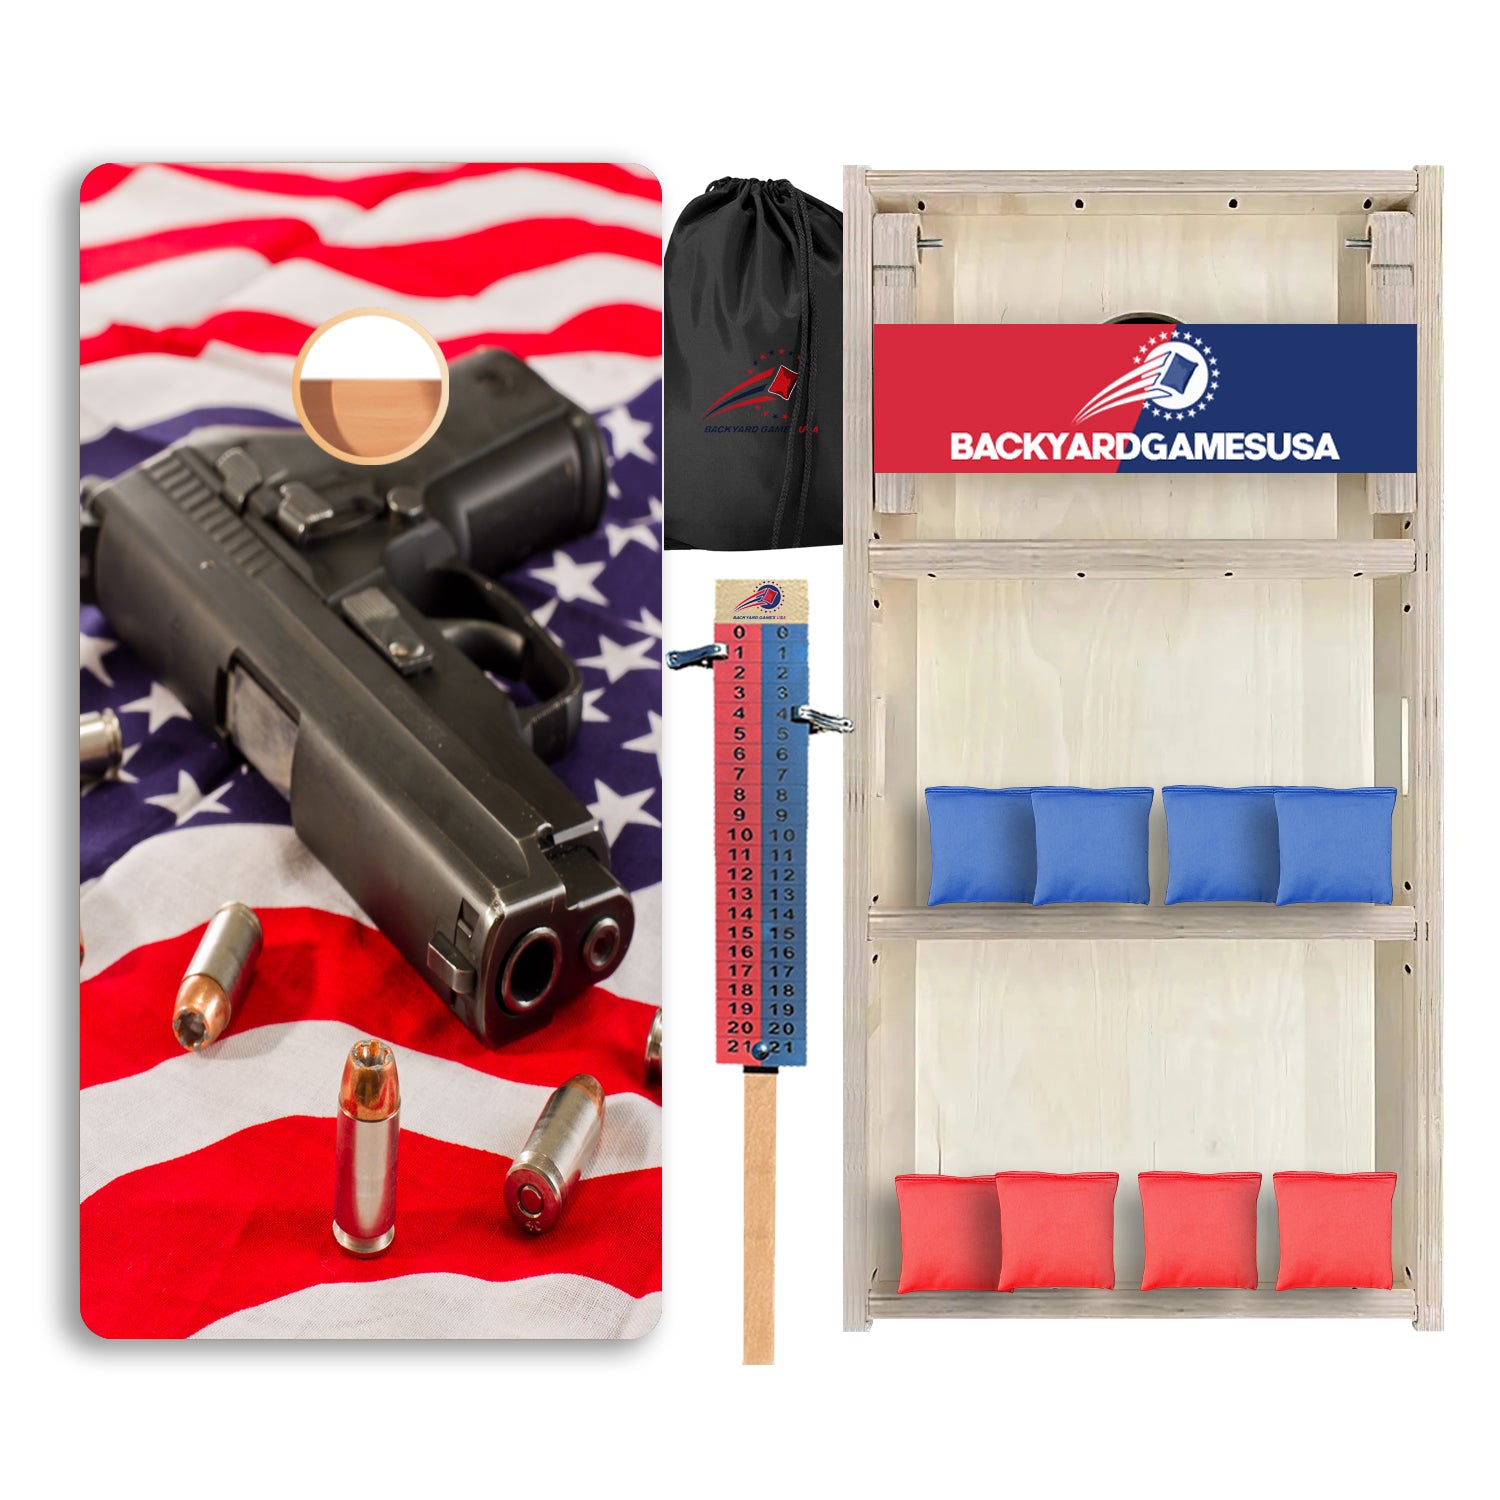 Gun Flag with Bullets Professional Cornhole Boards